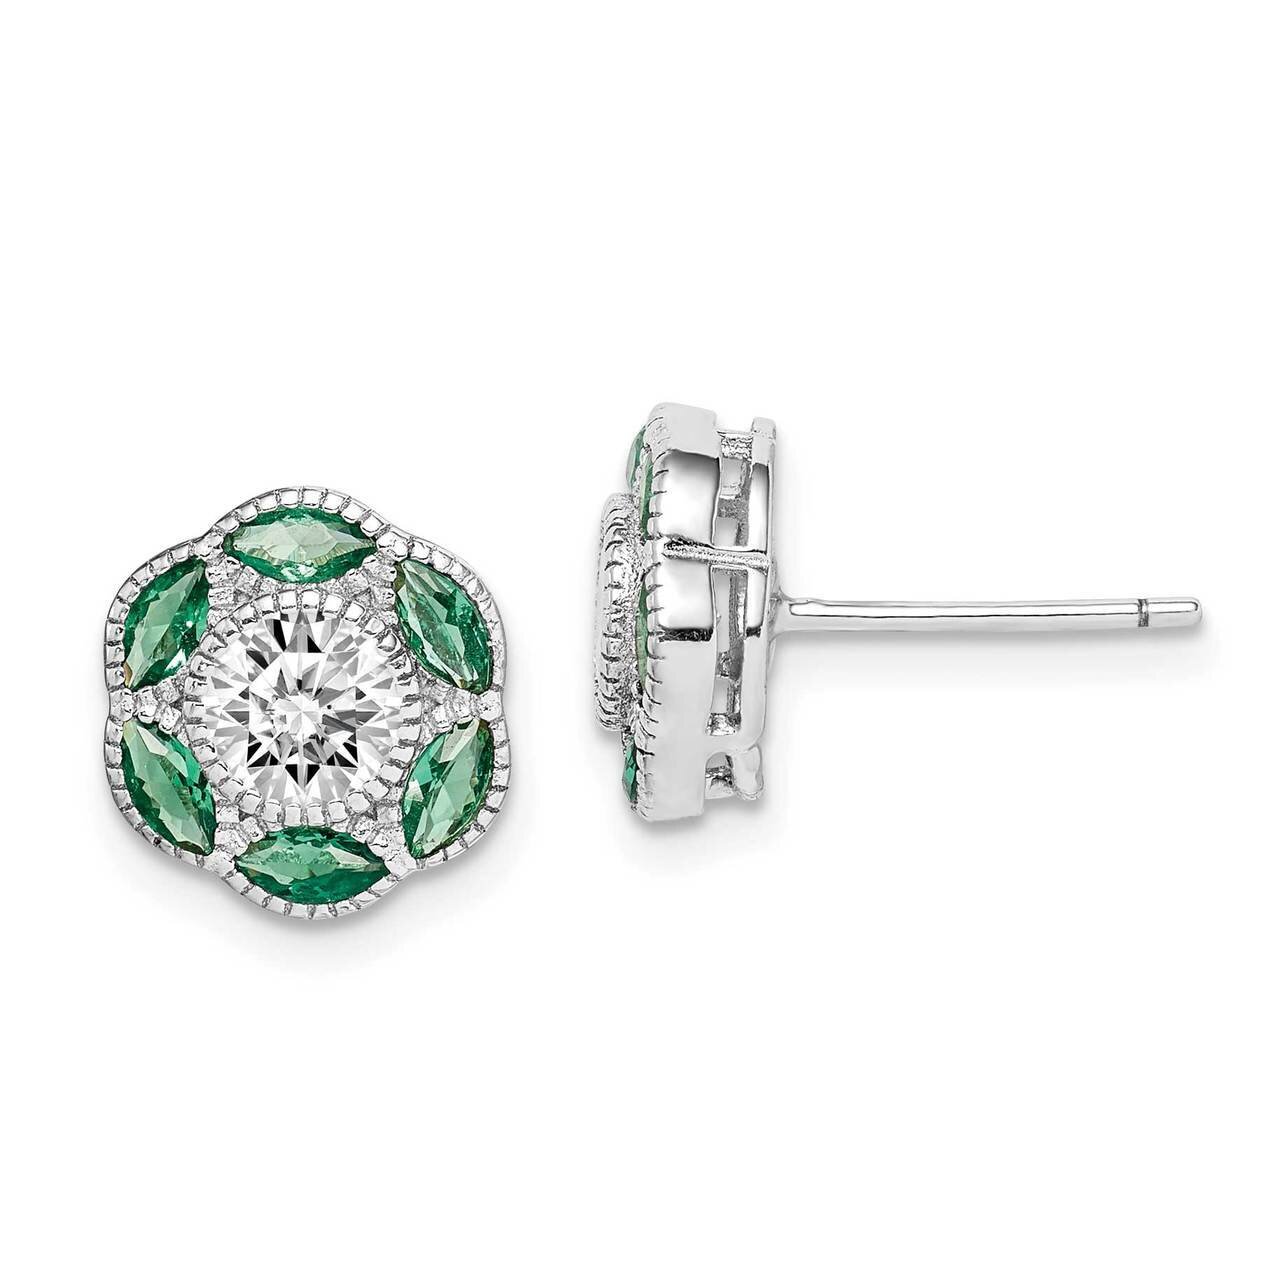 Synthetic Green Spinel & CZ Diamond Earrings Sterling Silver Rhodium-plated QE15292